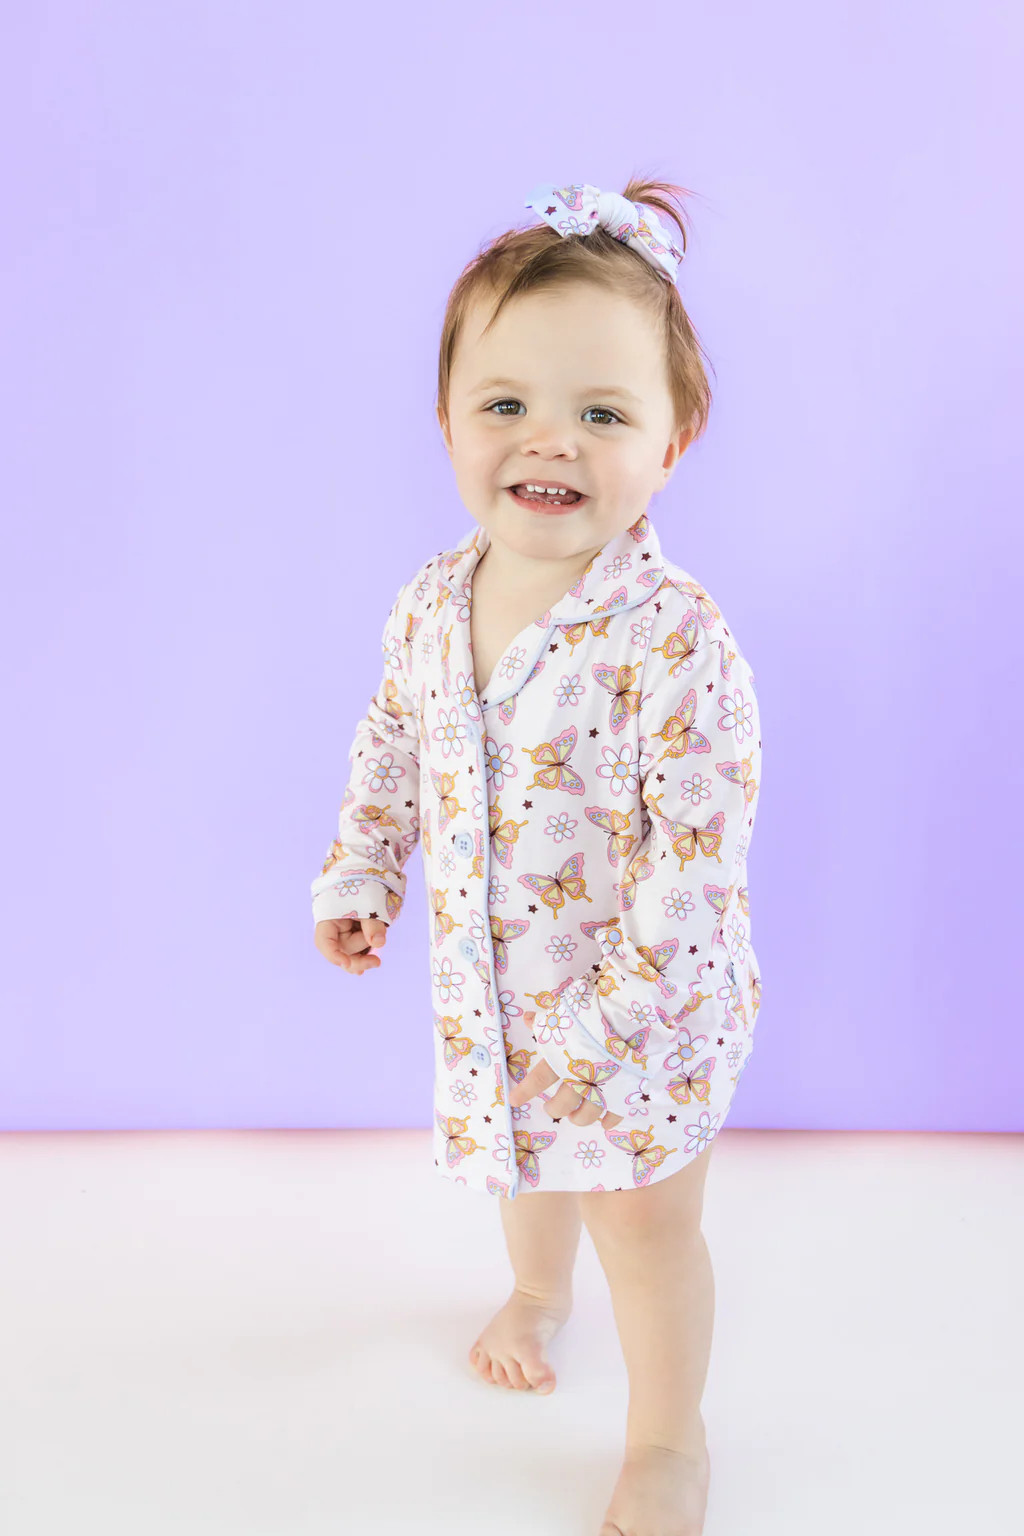 BLOSSOMIN' BUTTERFLY GIRL'S DREAM GOWN | DREAM BIG LITTLE CO